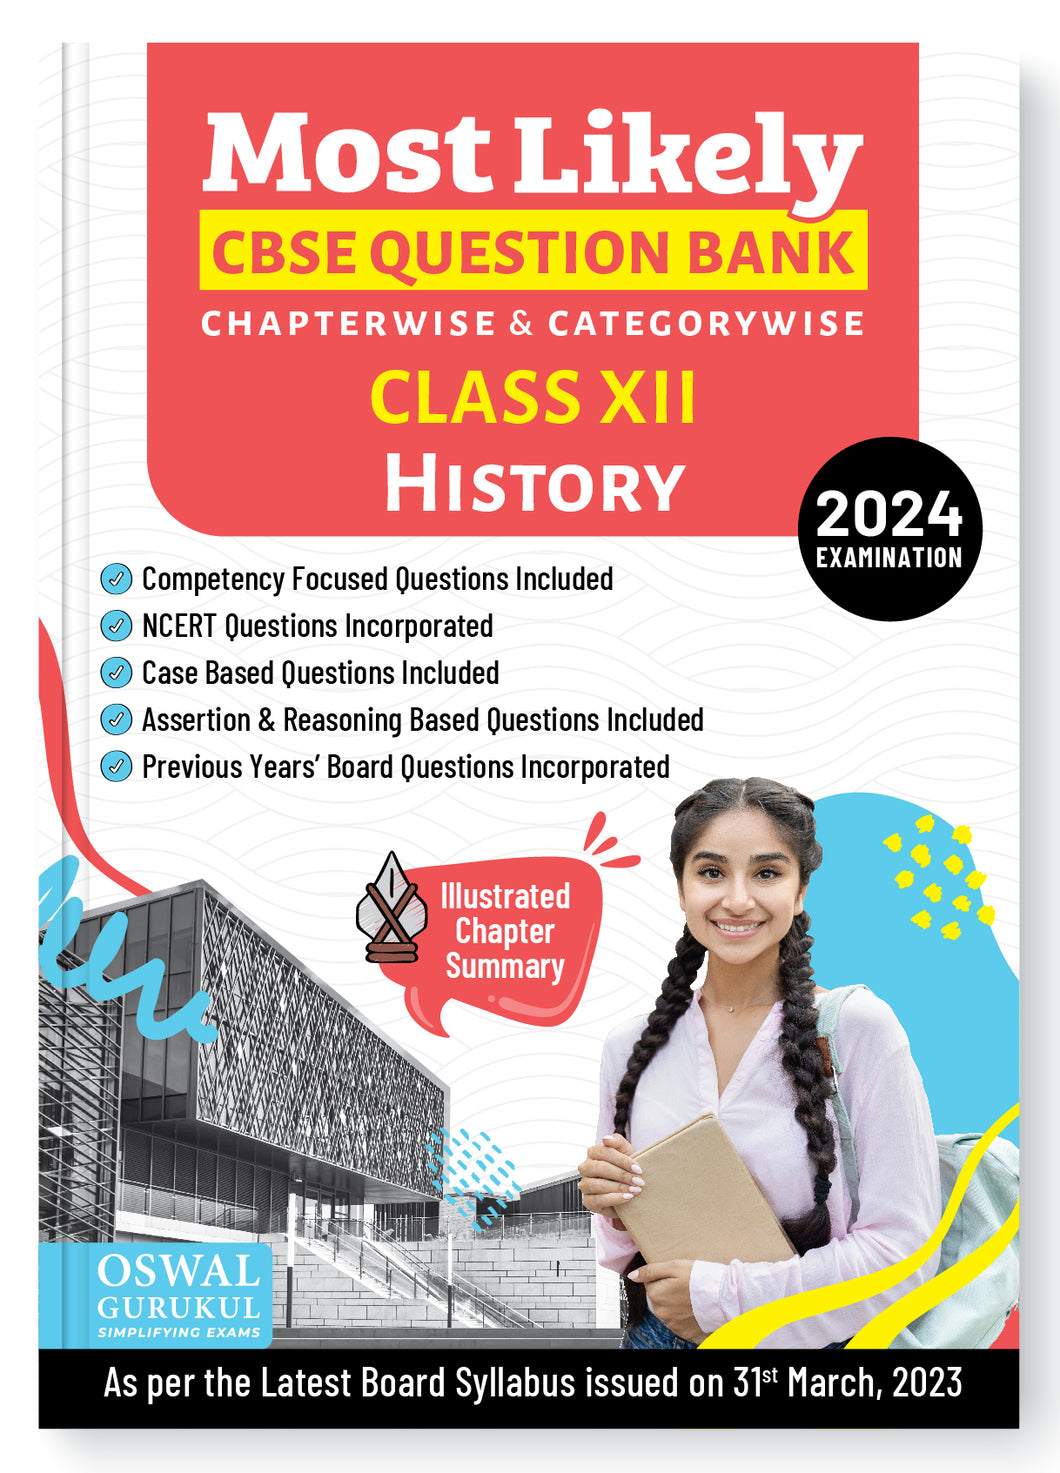 Oswal - Gurukul History Most Likely Question Bank : CBSE Class 12 for 2024 Exam